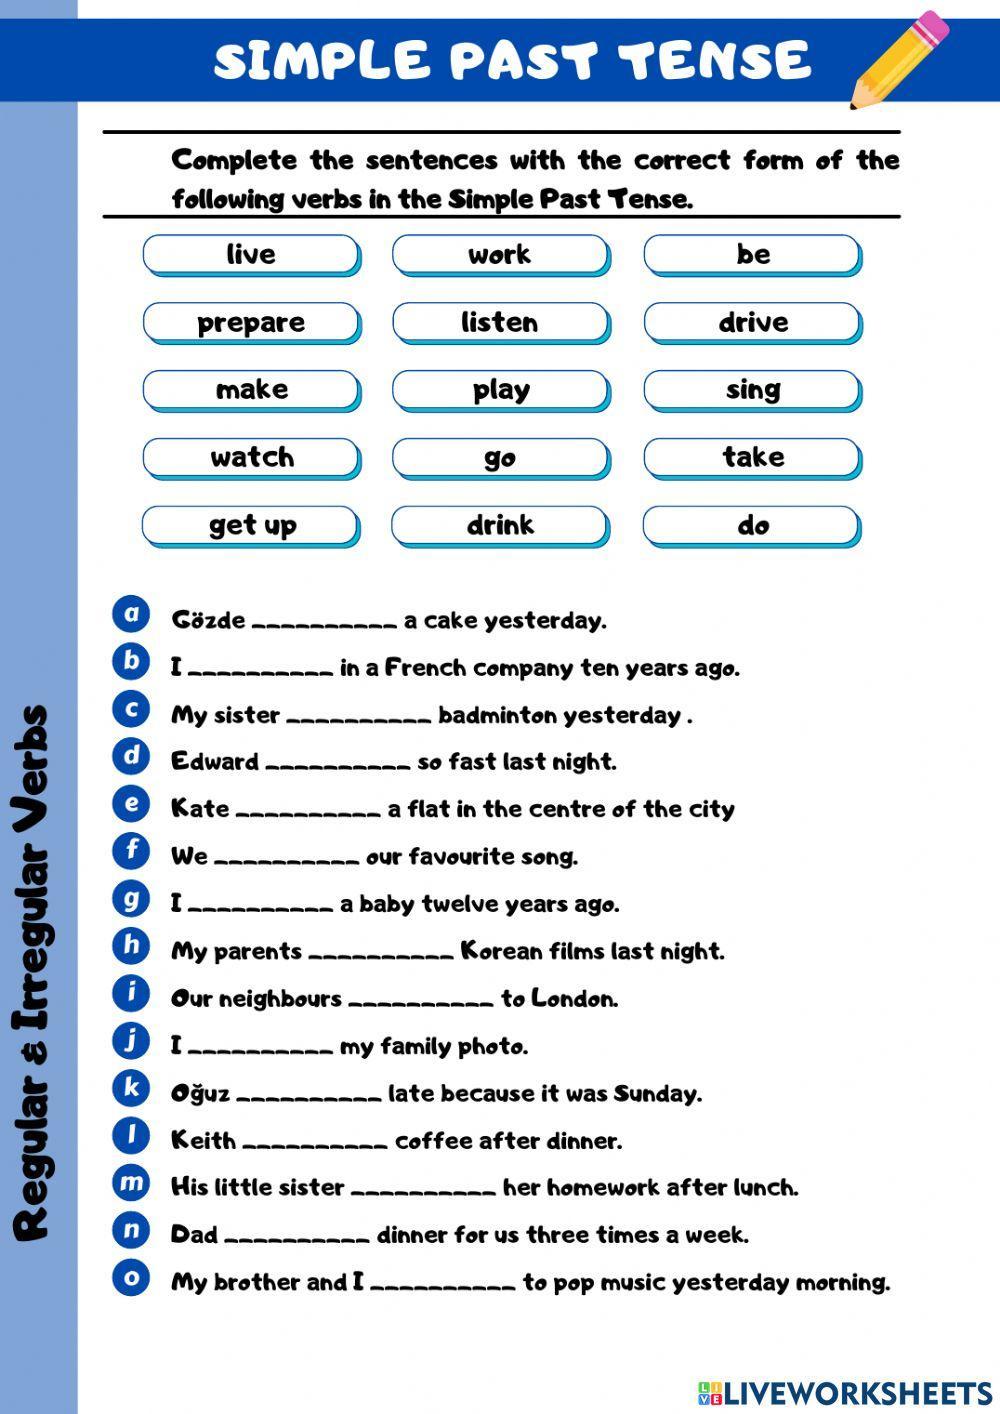 Simple Past Tense online exercise for Grade 6 | Live Worksheets